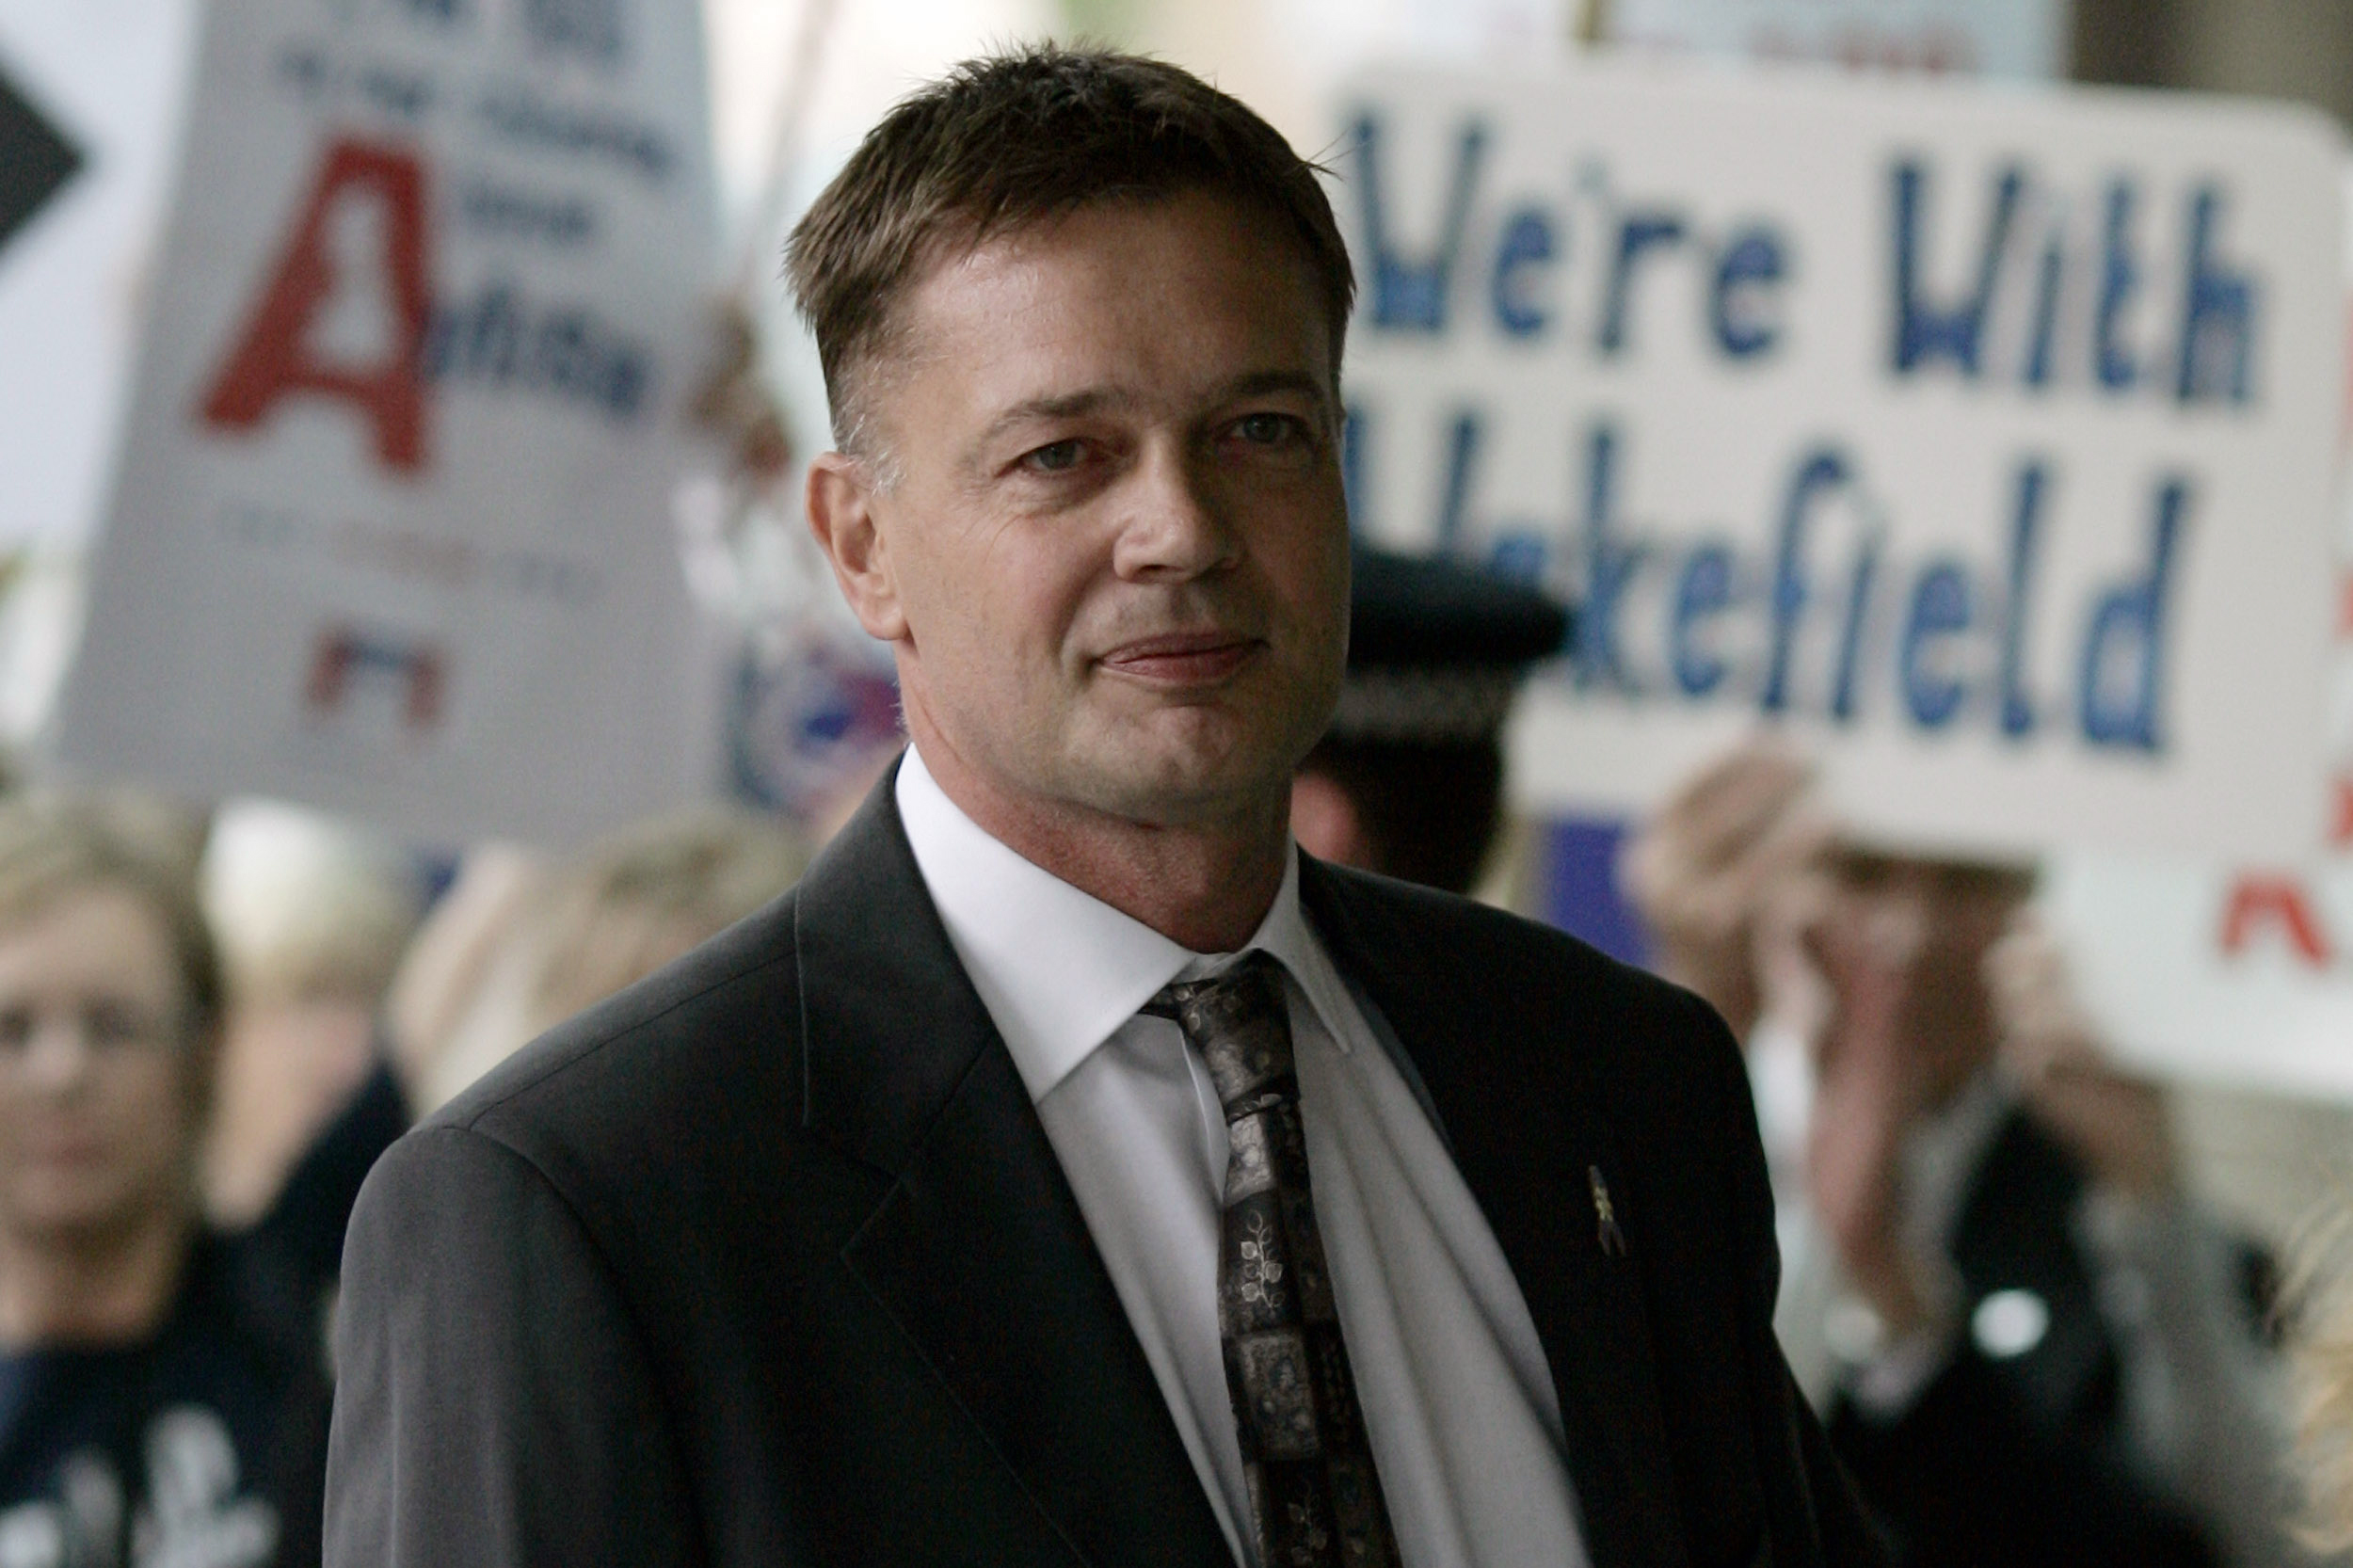 PHOTO: In this July 16, 2007 file photo Andrew Wakefield arrives at the General Medical Council in London.